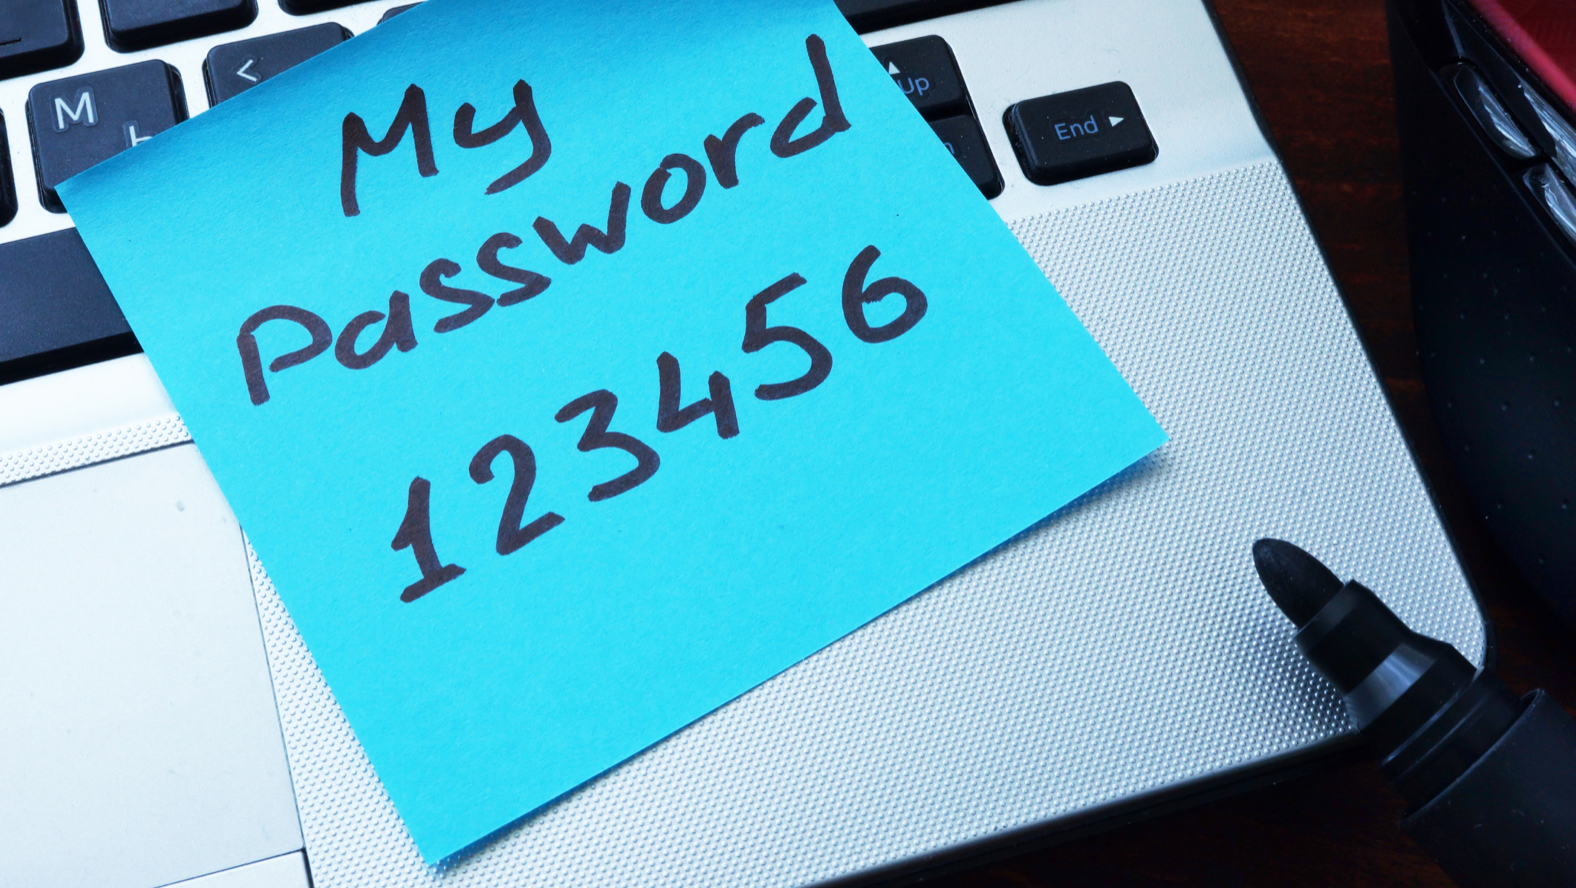 Is Your Password Secure?